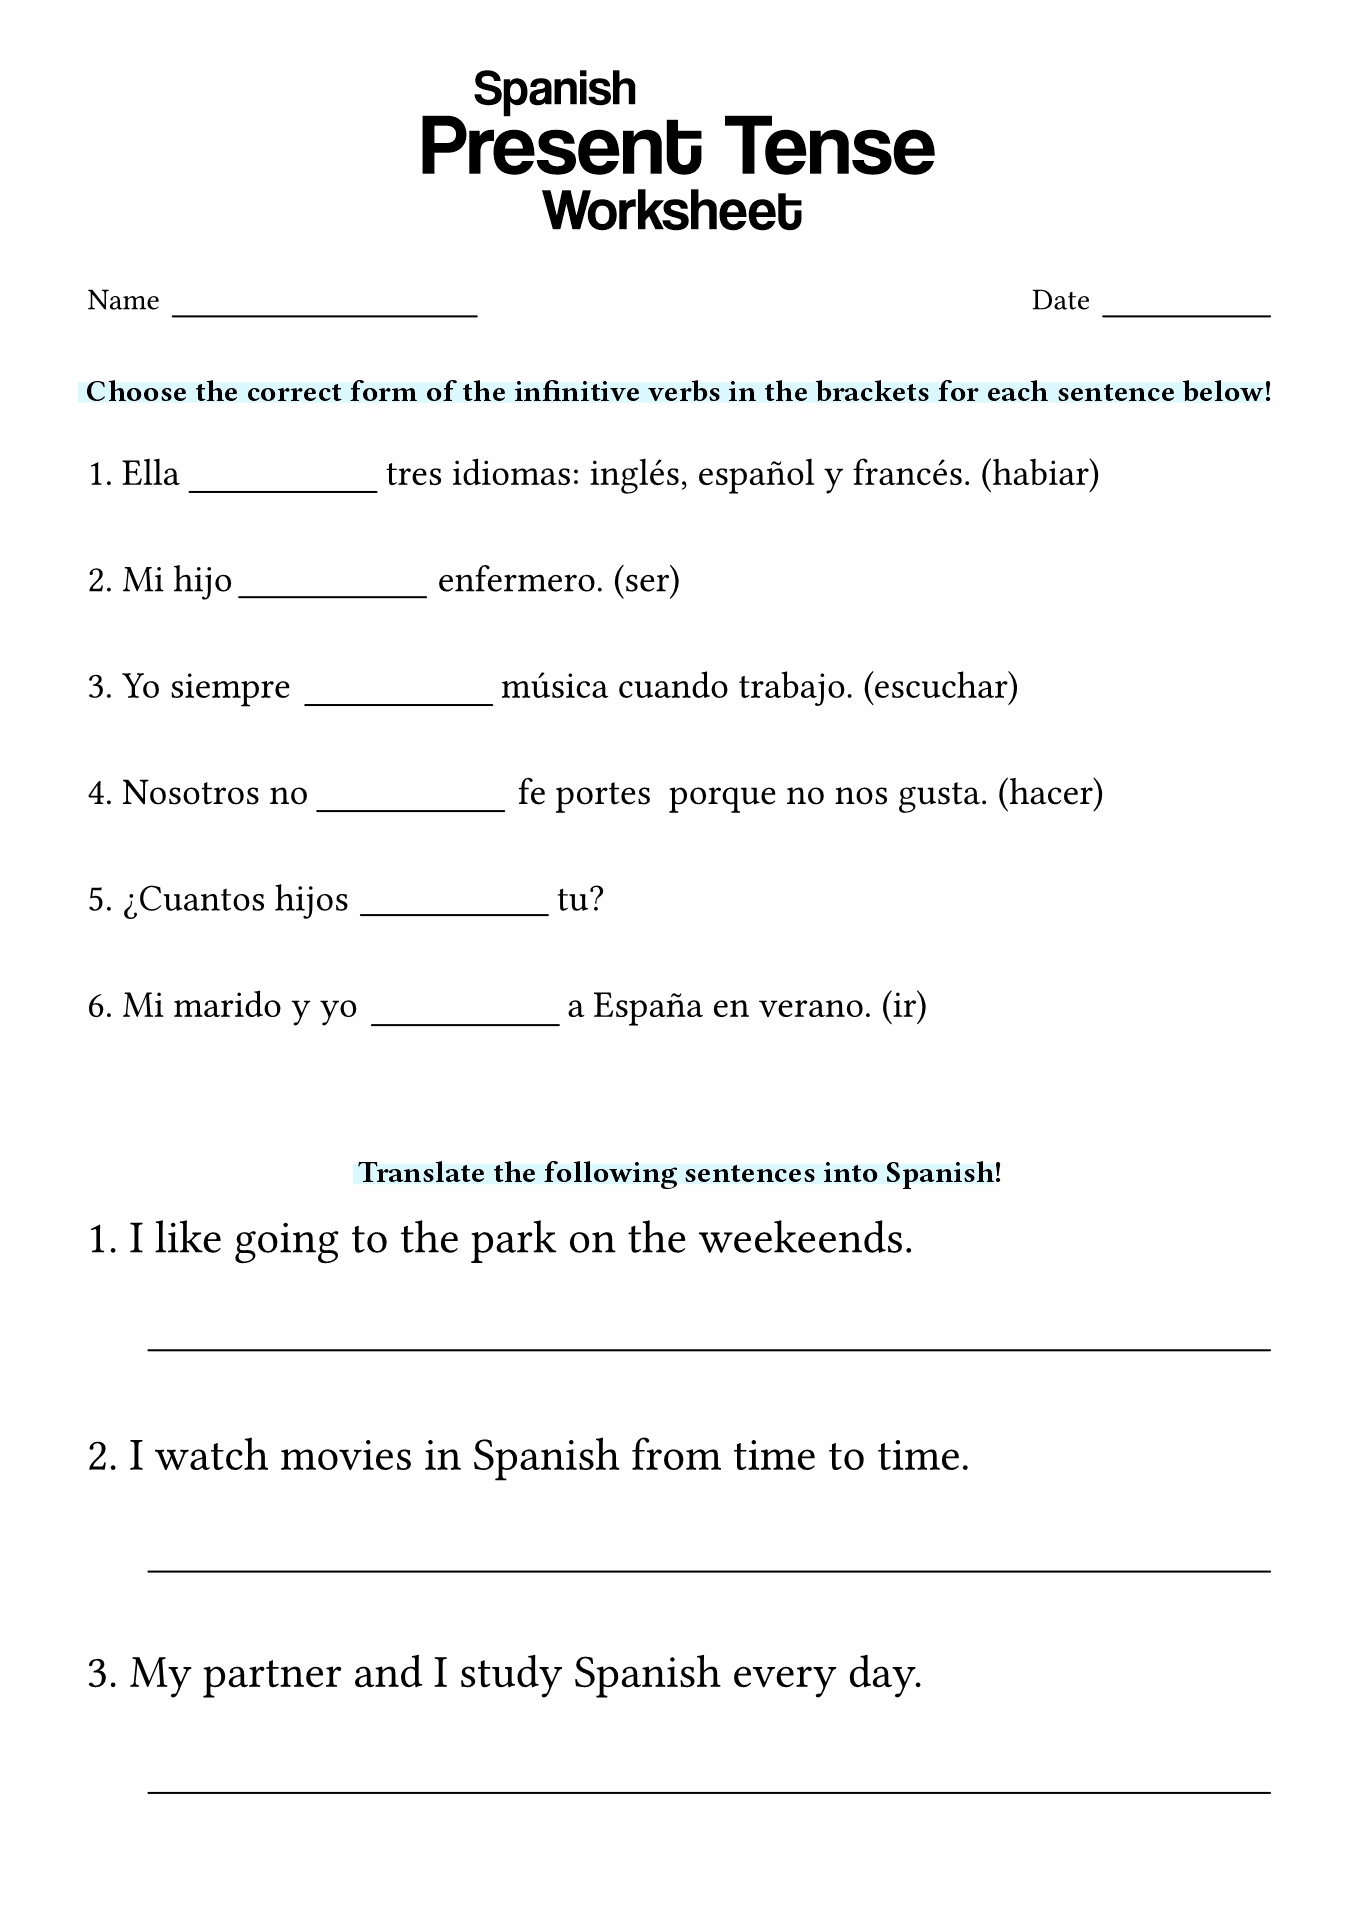 18 Best Images Of Spanish Verb Worksheets Spanish Verb Conjugation Worksheets Blank Spanish